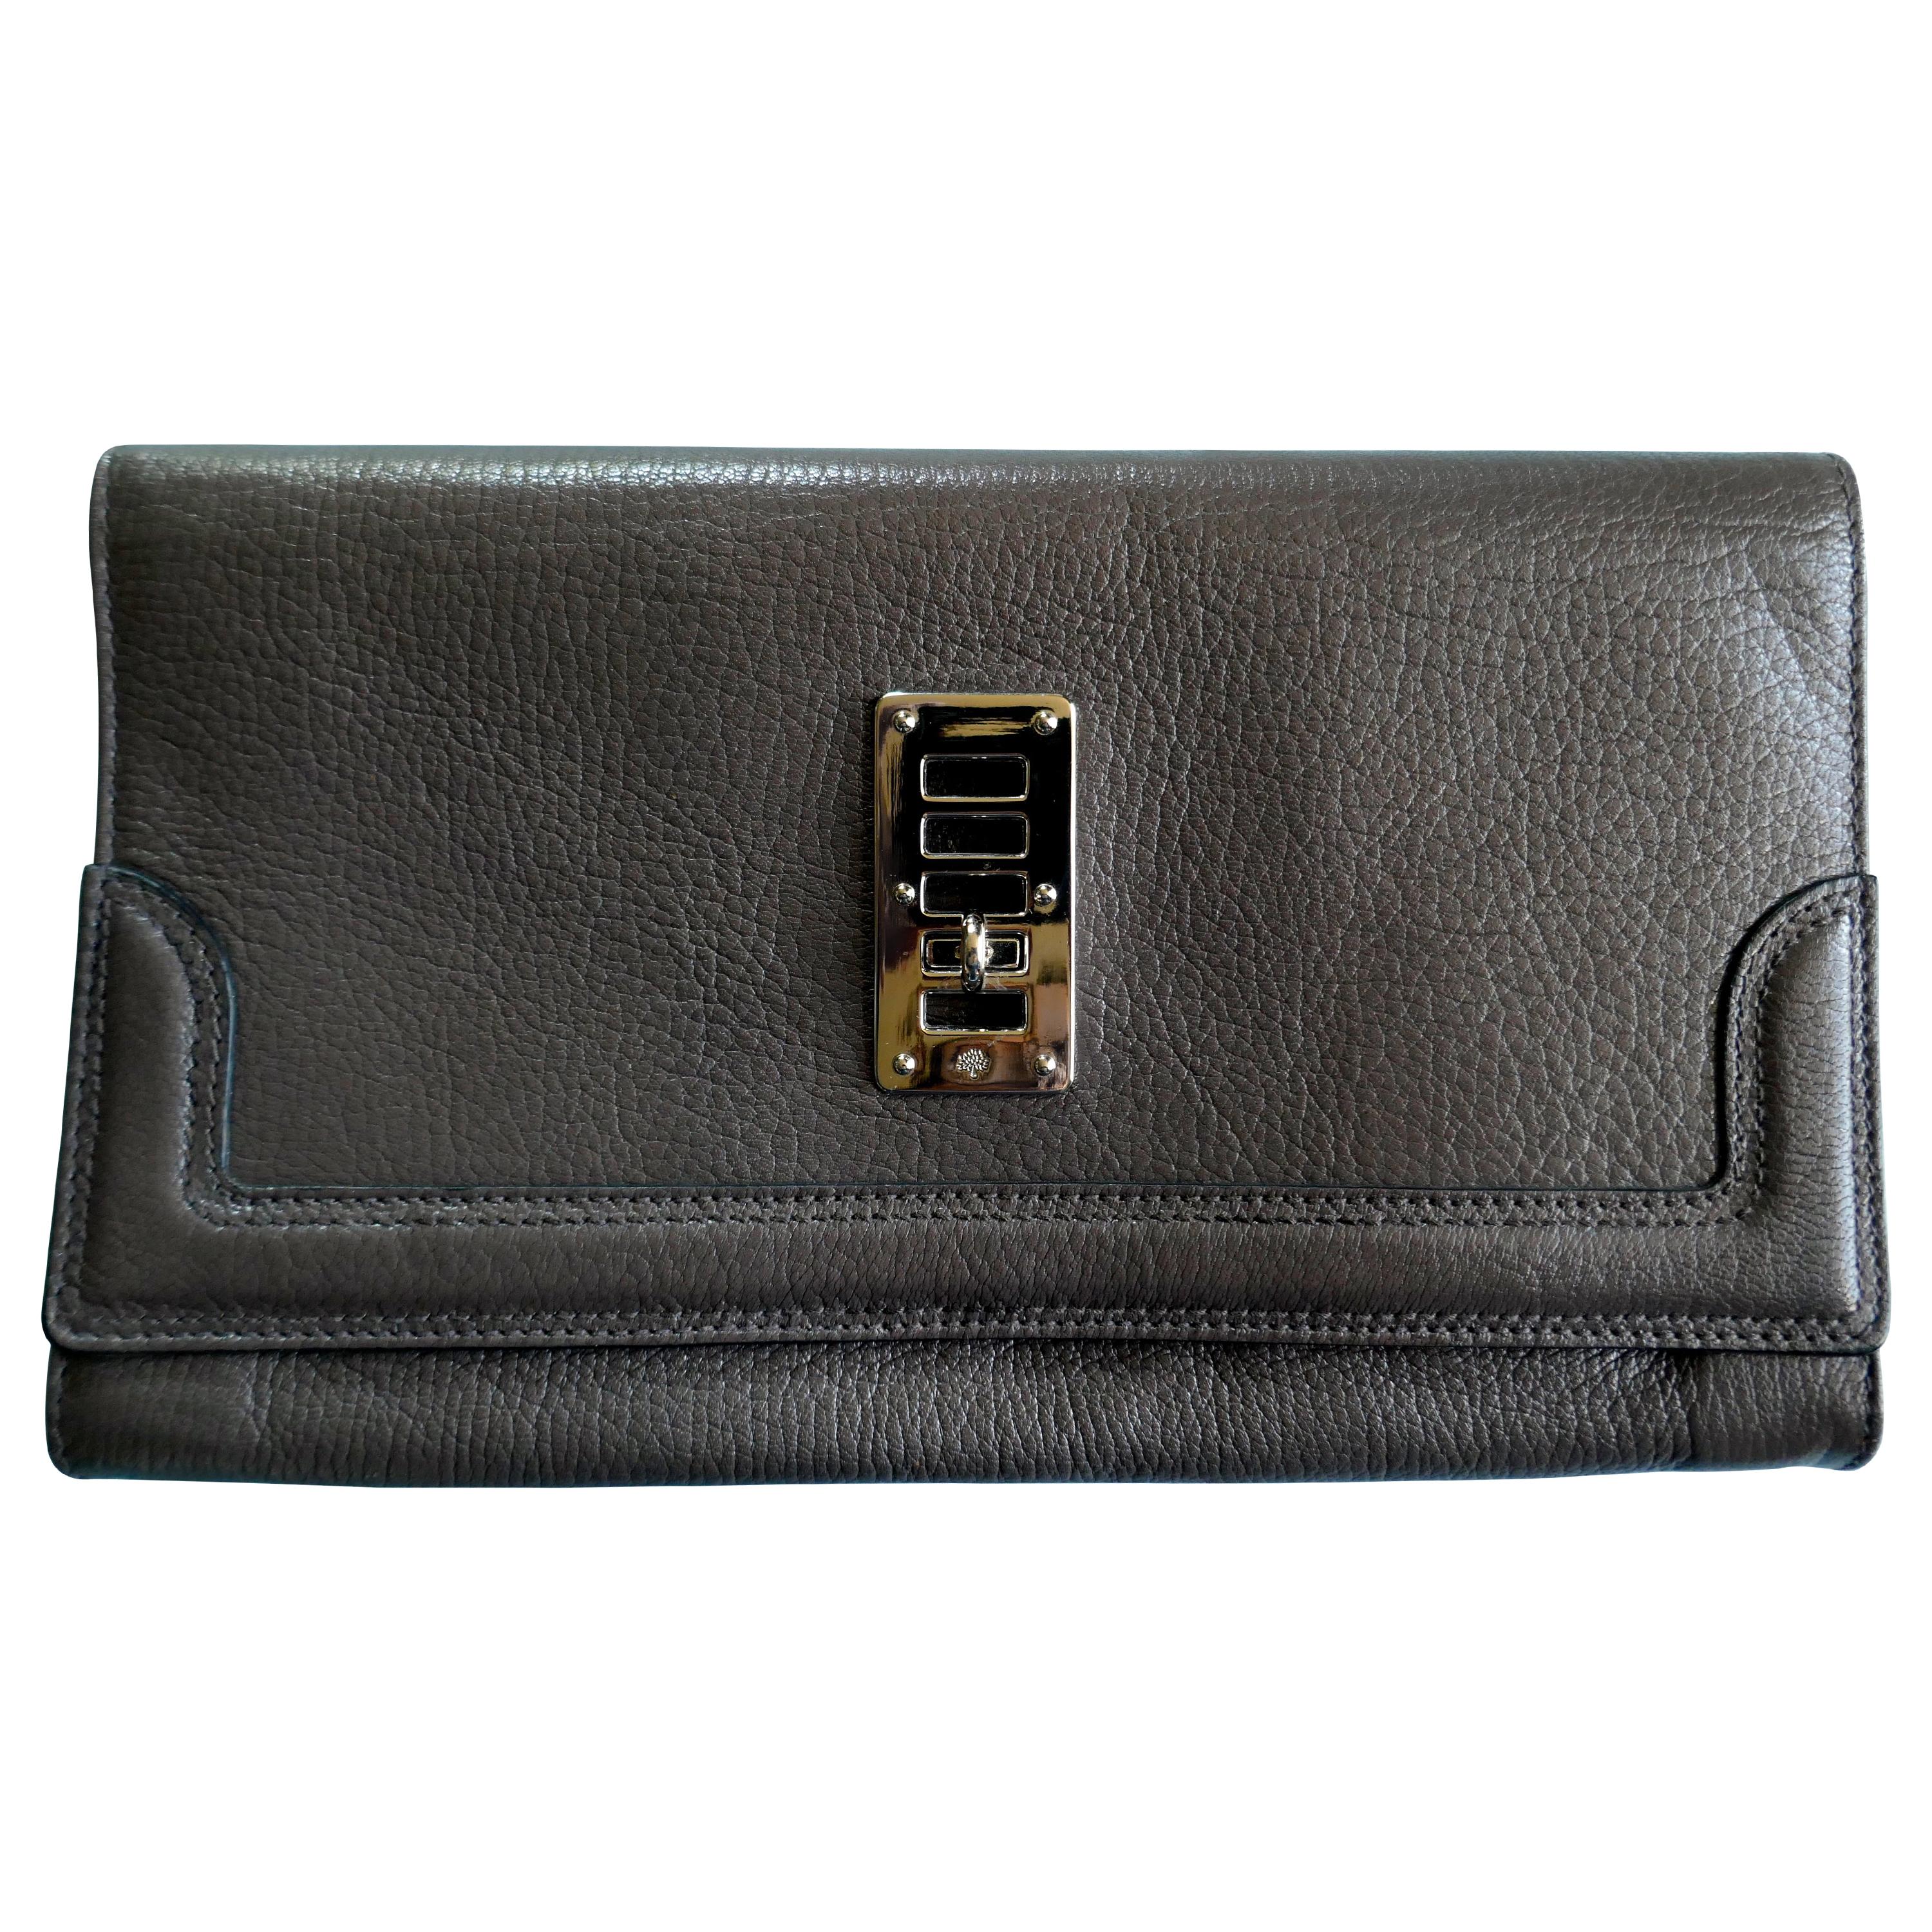 Brown Mulberry Natural Leather Clutch Bag